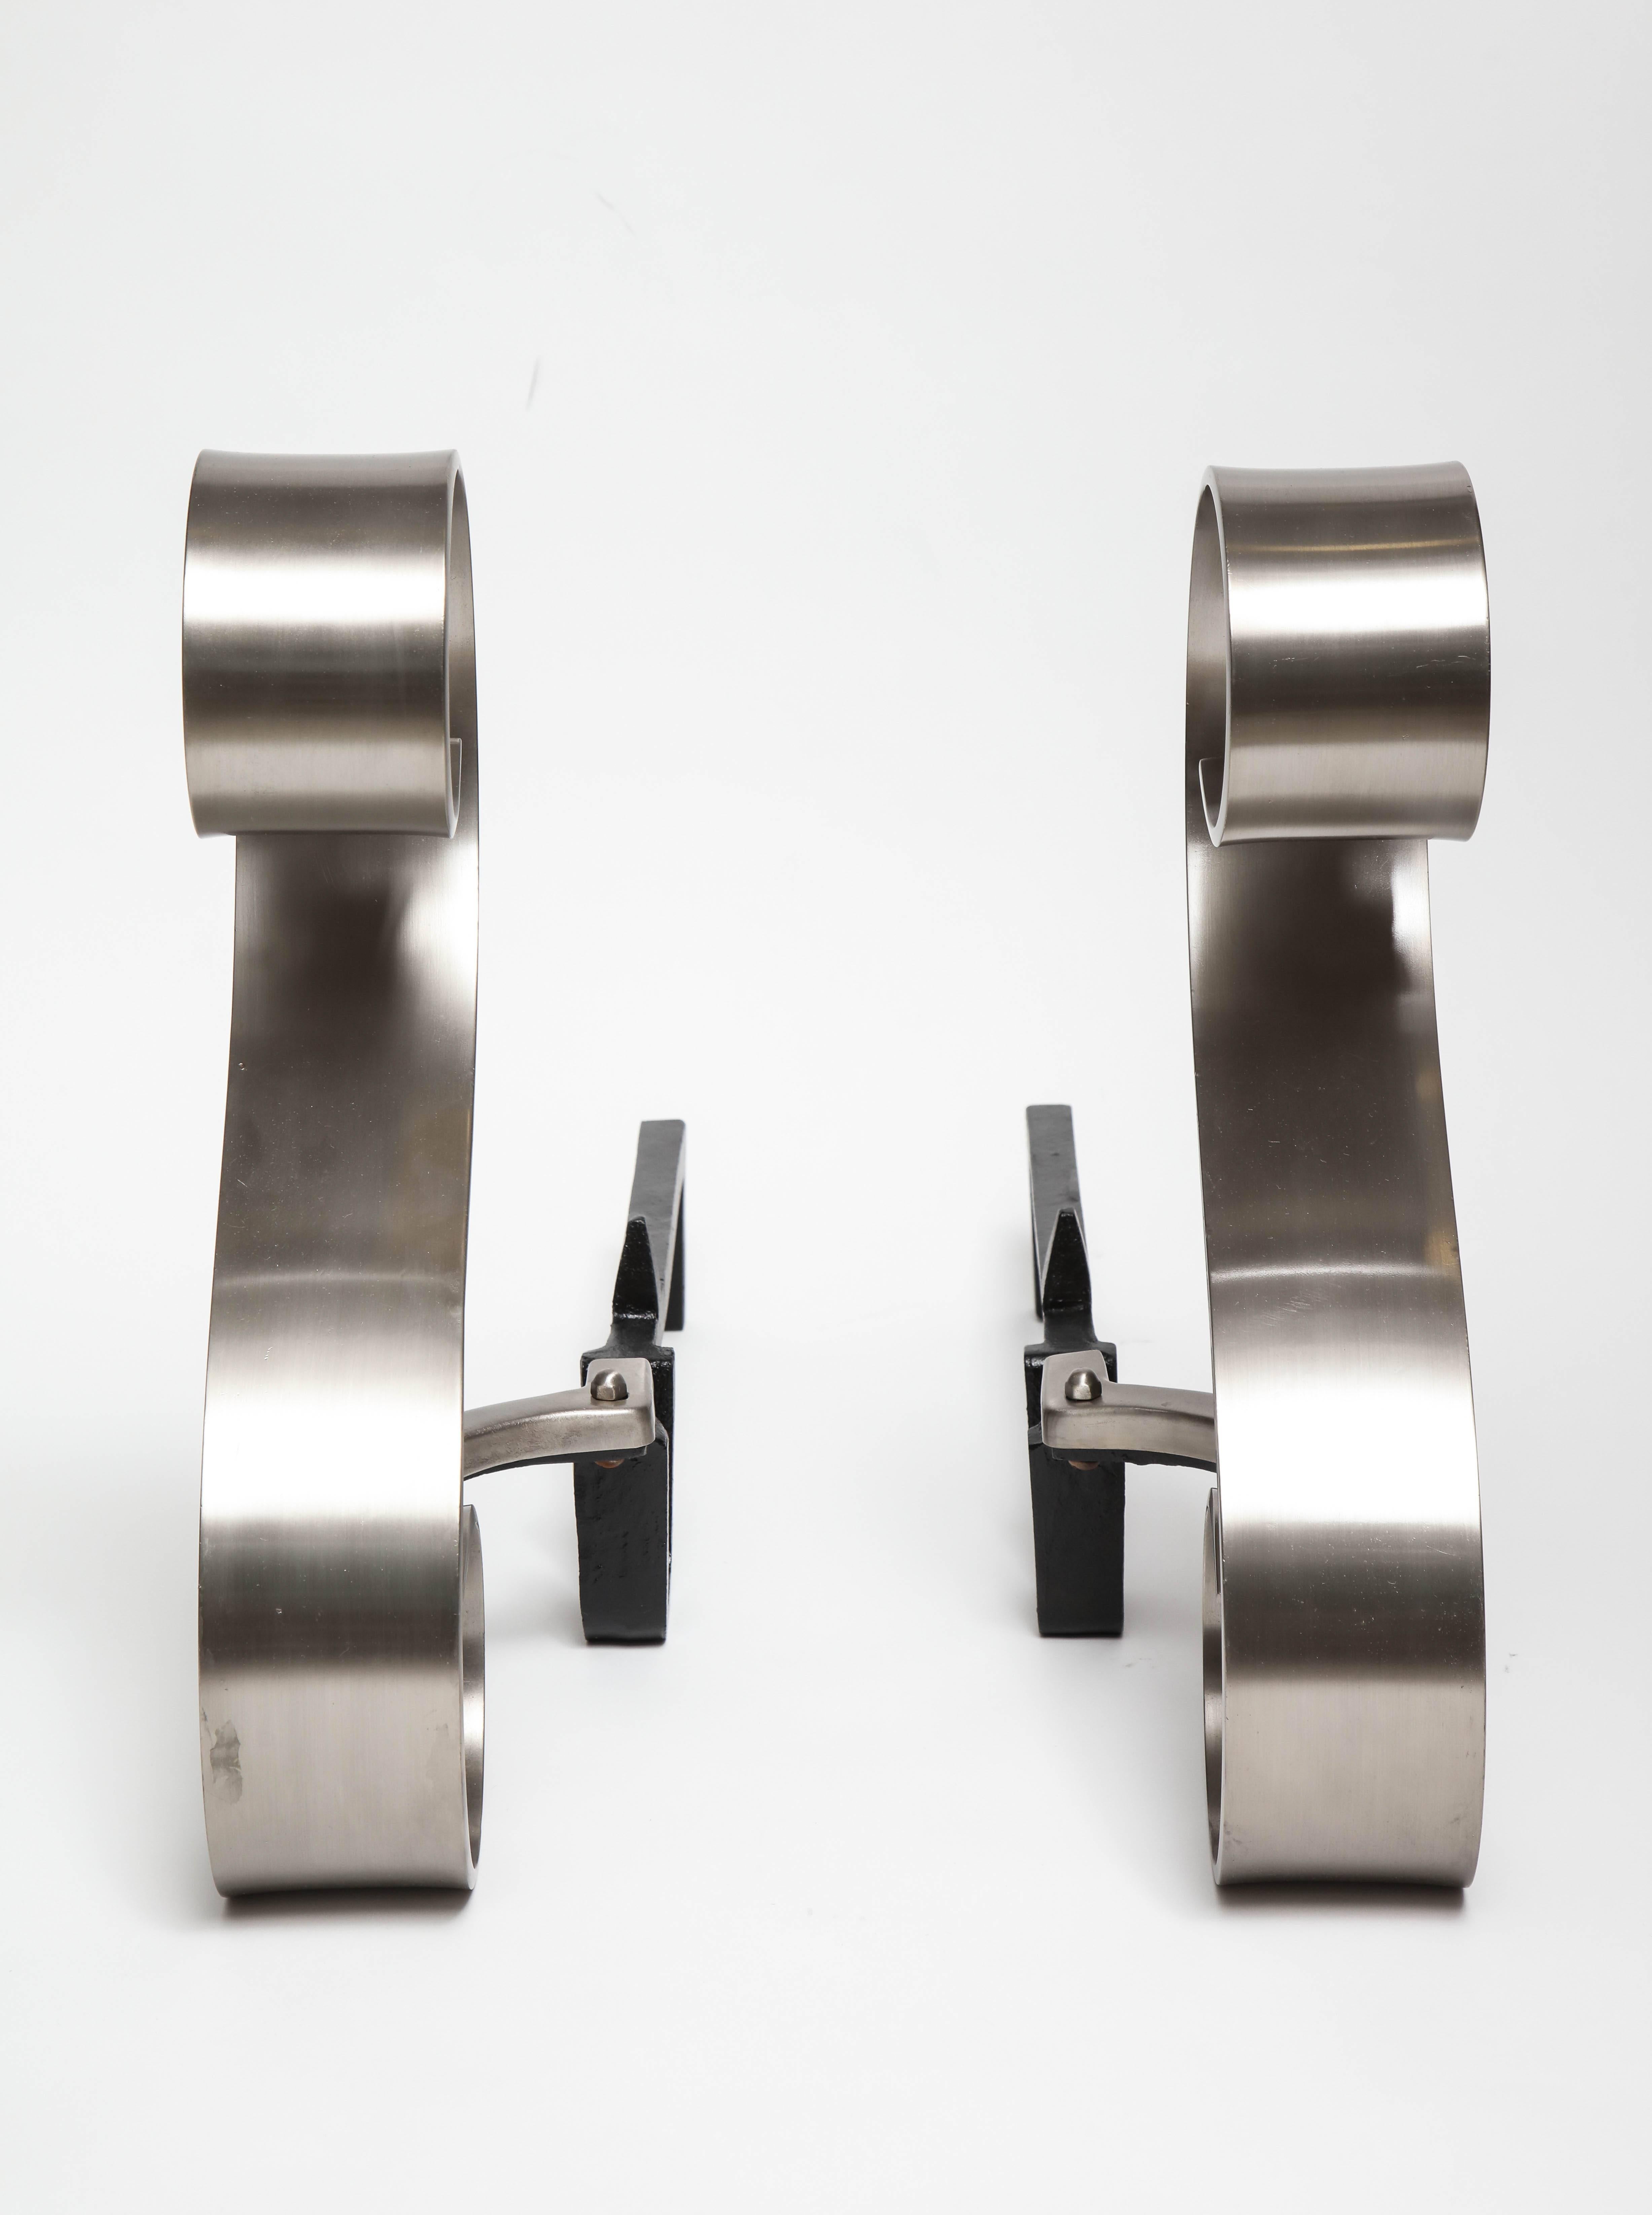 Pair of graceful Art Deco scroll motif andirons in a brushed nickel finish with black iron backs.